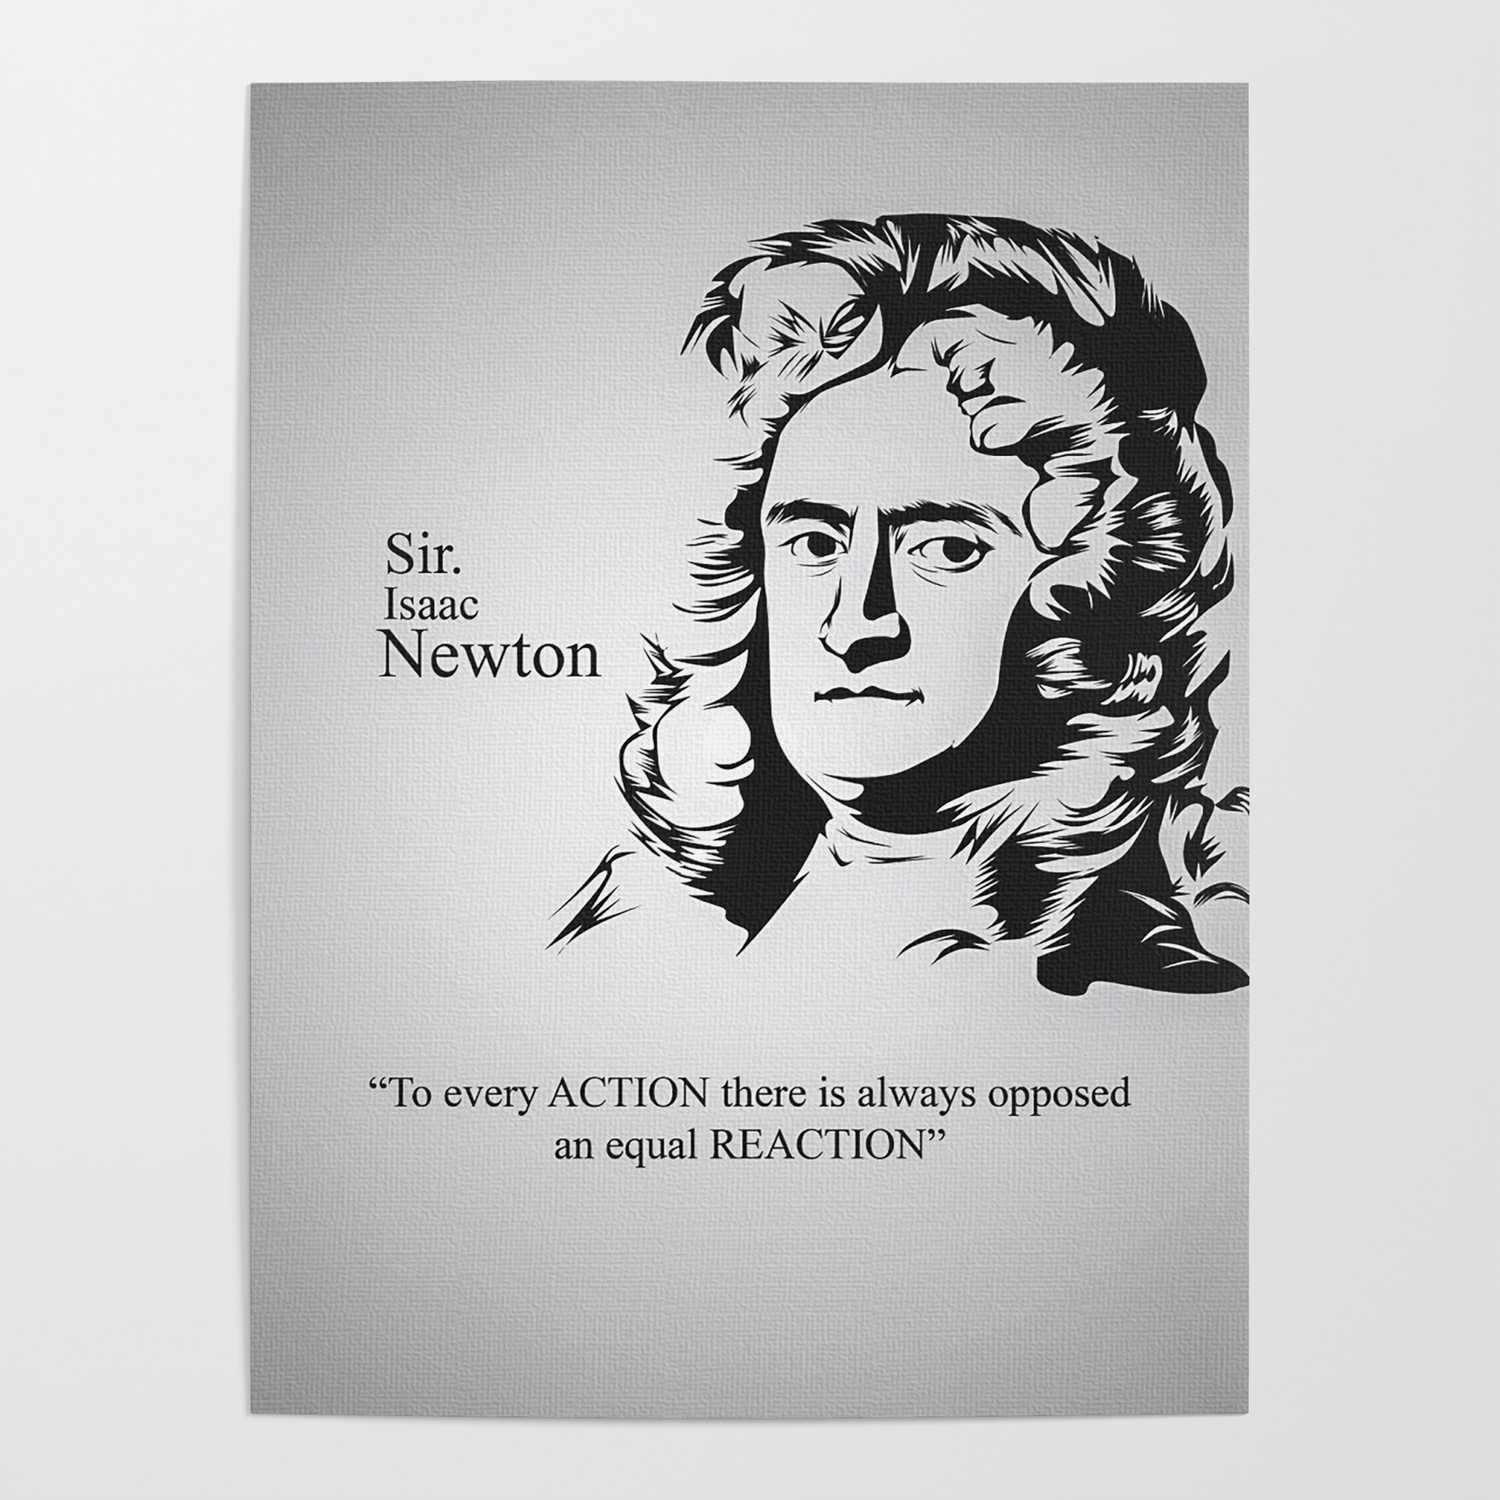 Nuovo Poster Artistico Sir Isaac Newton di Granger Collection Poster 30 x 40 cm Stampa Artistica Professionale